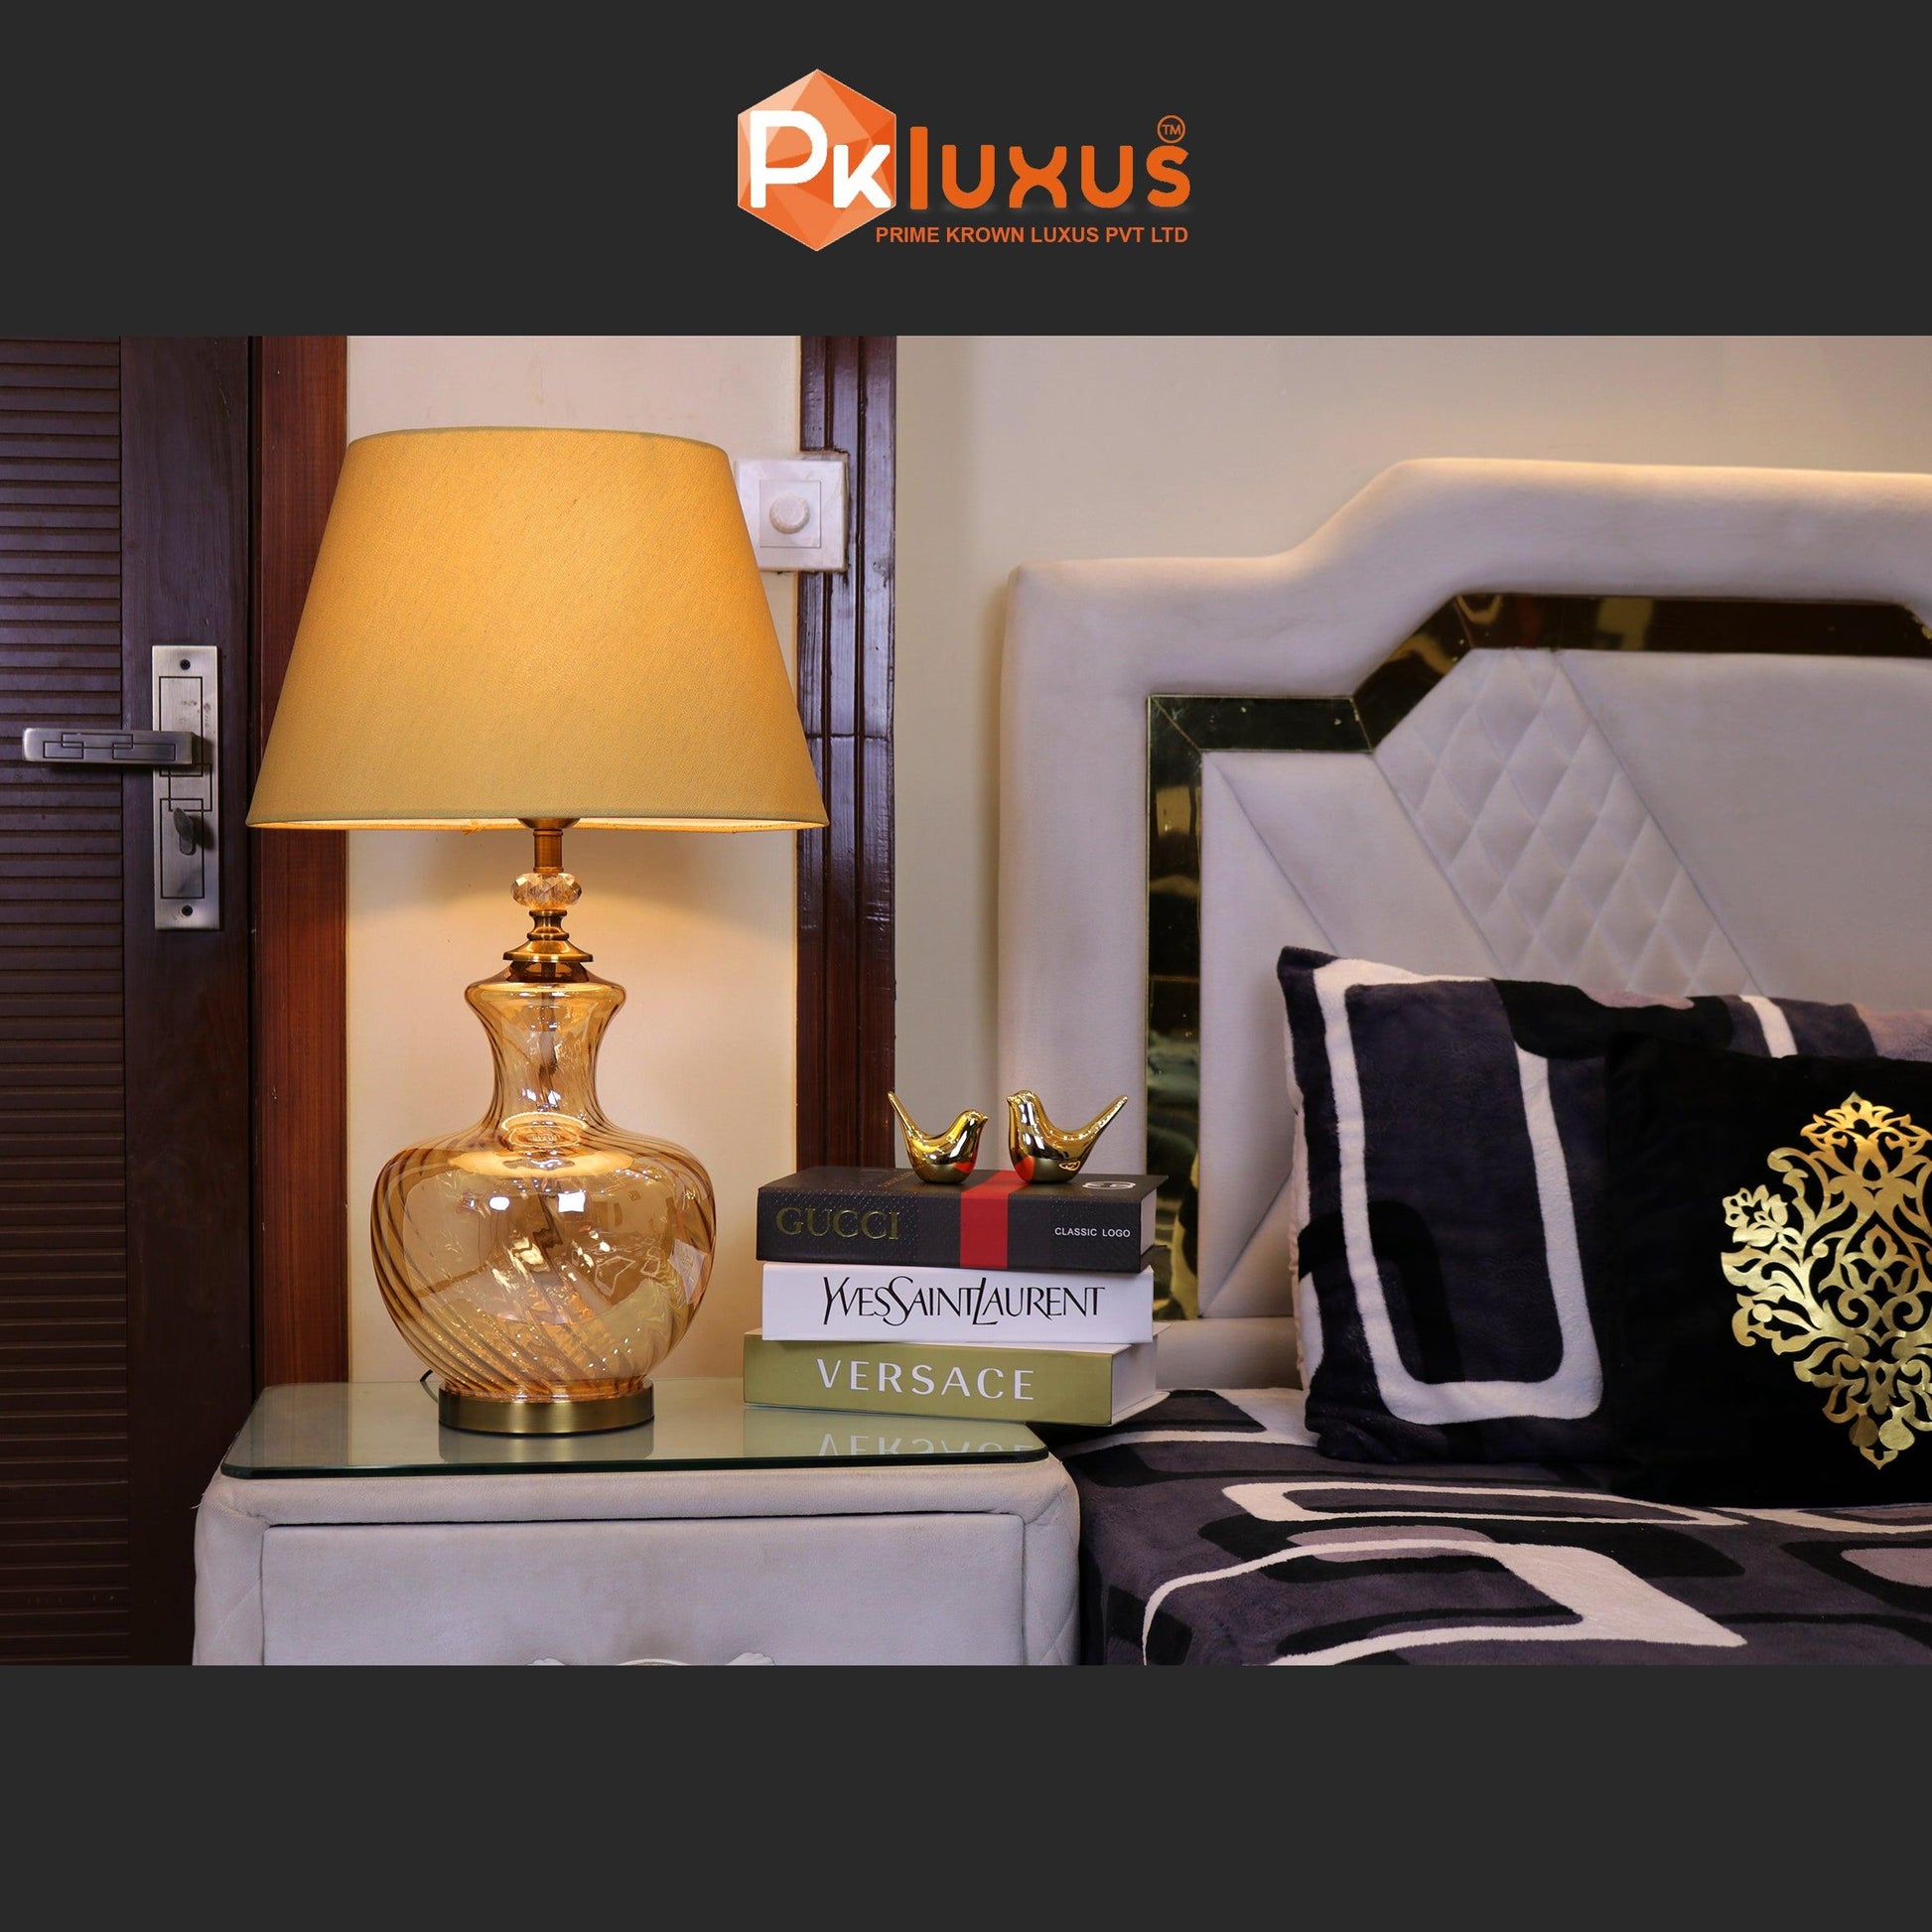 Luxury Gold Big Clay Pot Style Lamp With Golden Shade | PK LUXUS™ - PK LUXUS